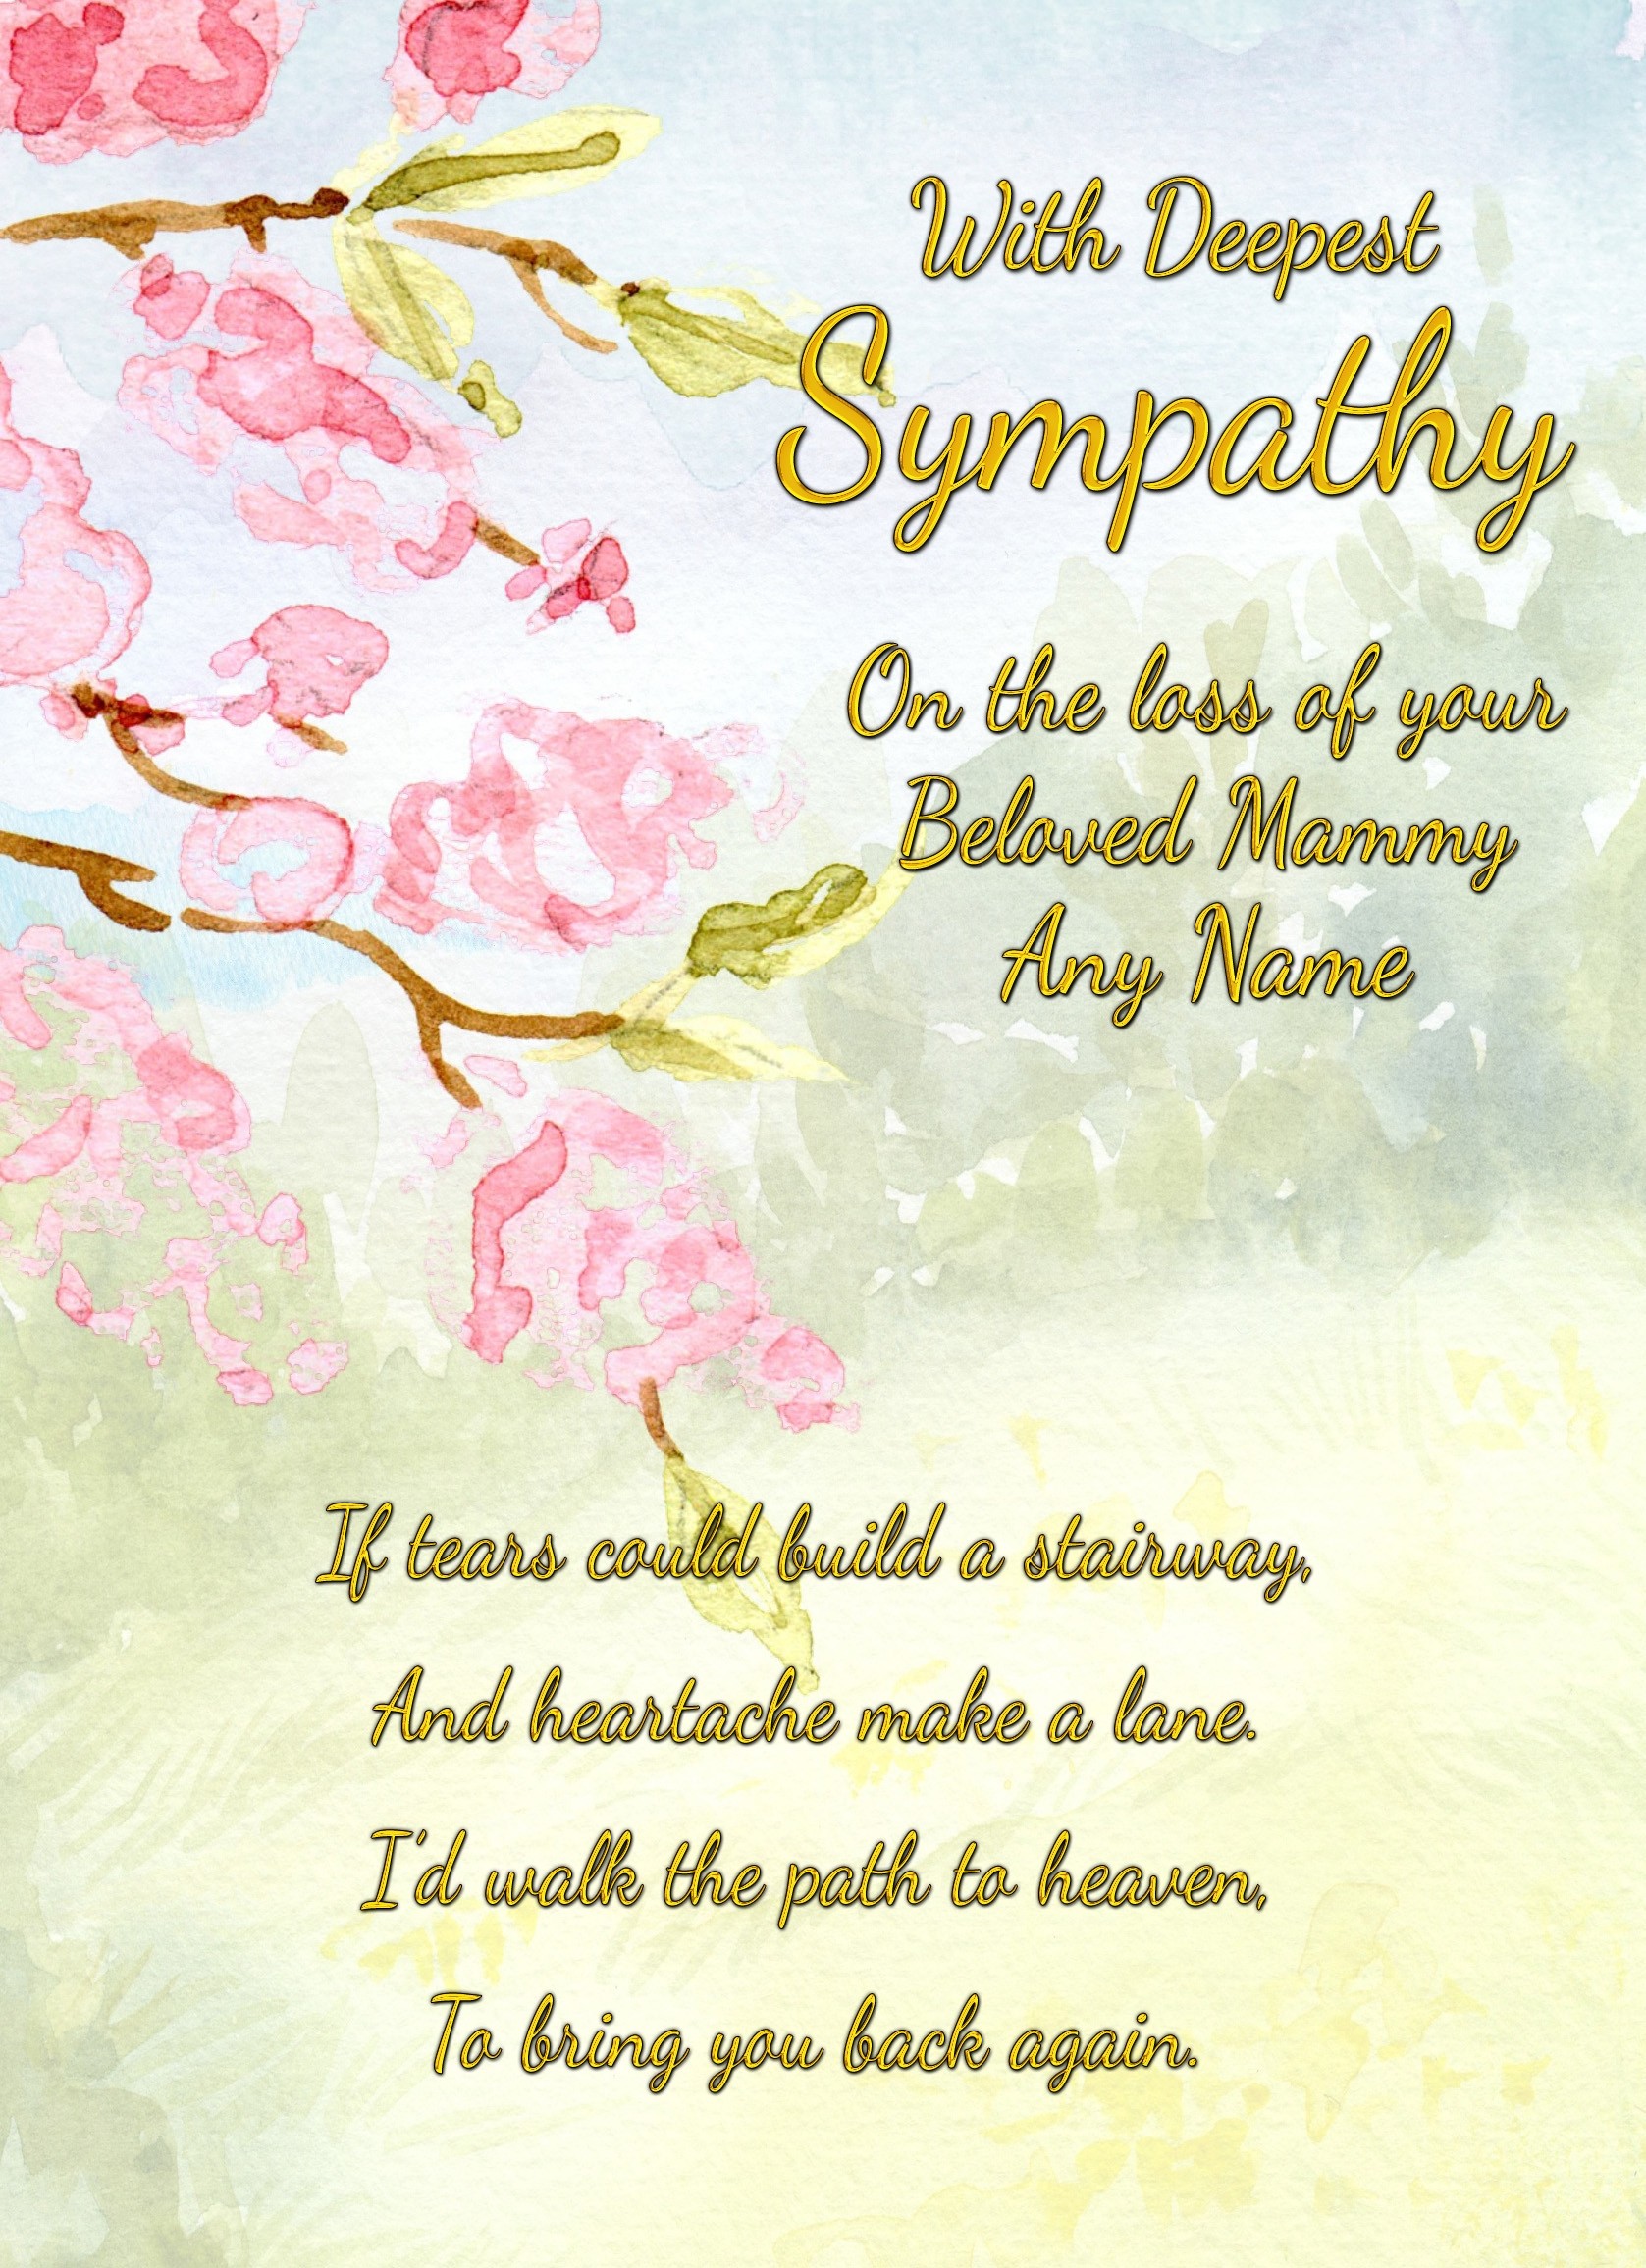 Personalised Sympathy Bereavement Card (With Deepest Sympathy, Beloved Mammy)